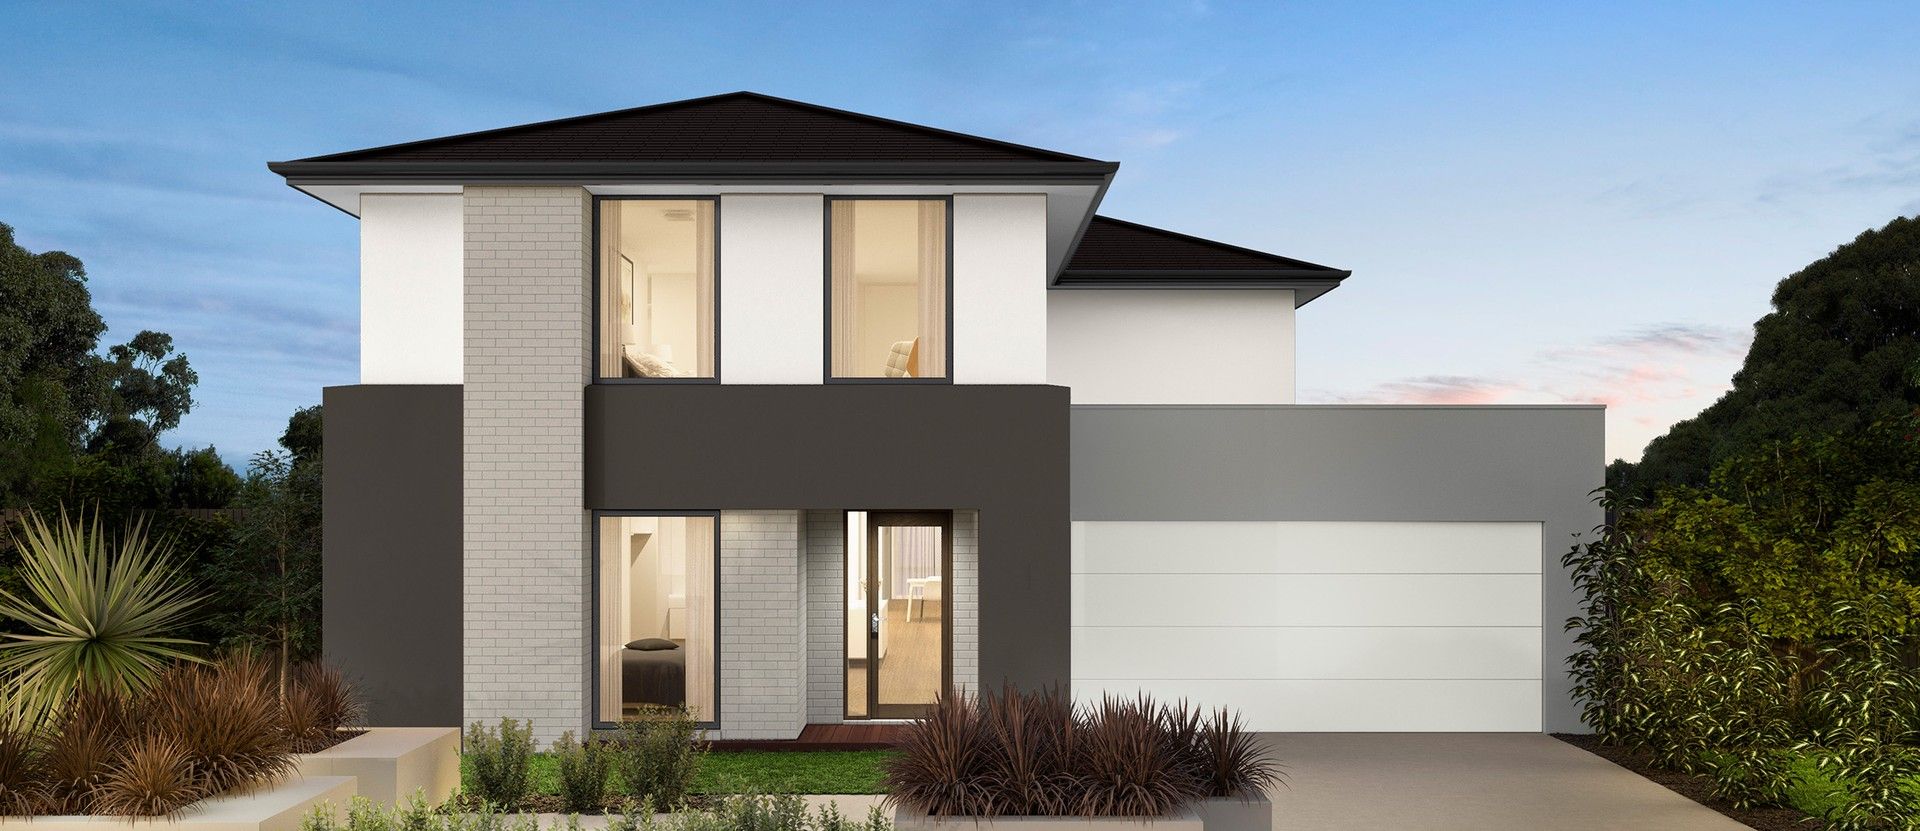 5 bedrooms New House & Land in Chance Way Clyde North, Lot: 344 CLYDE VIC, 3978